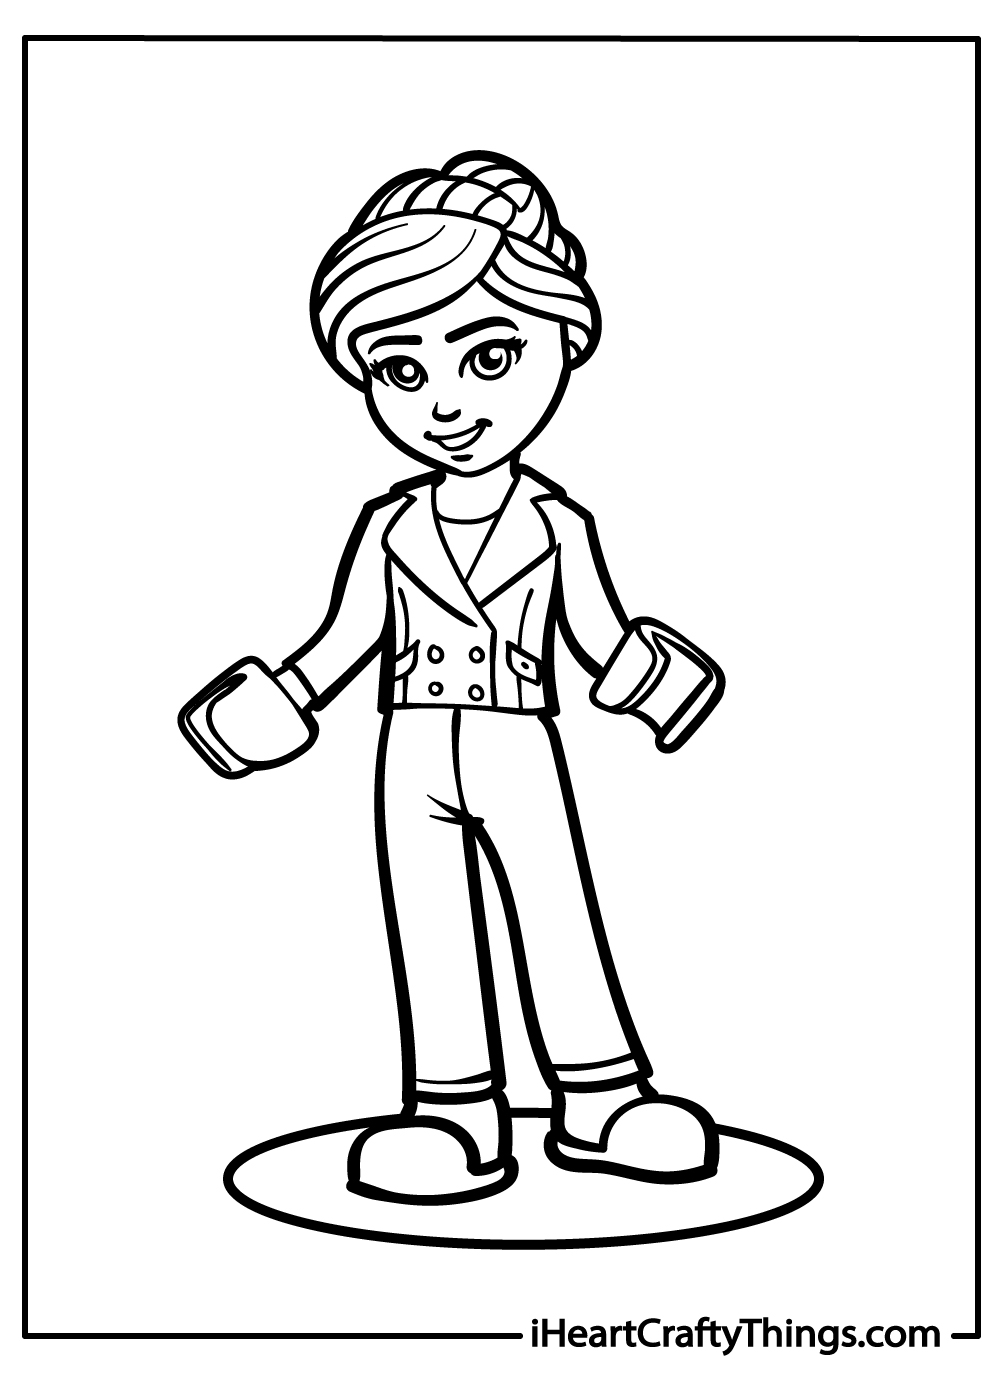 Olivia Lego friends coloring pages